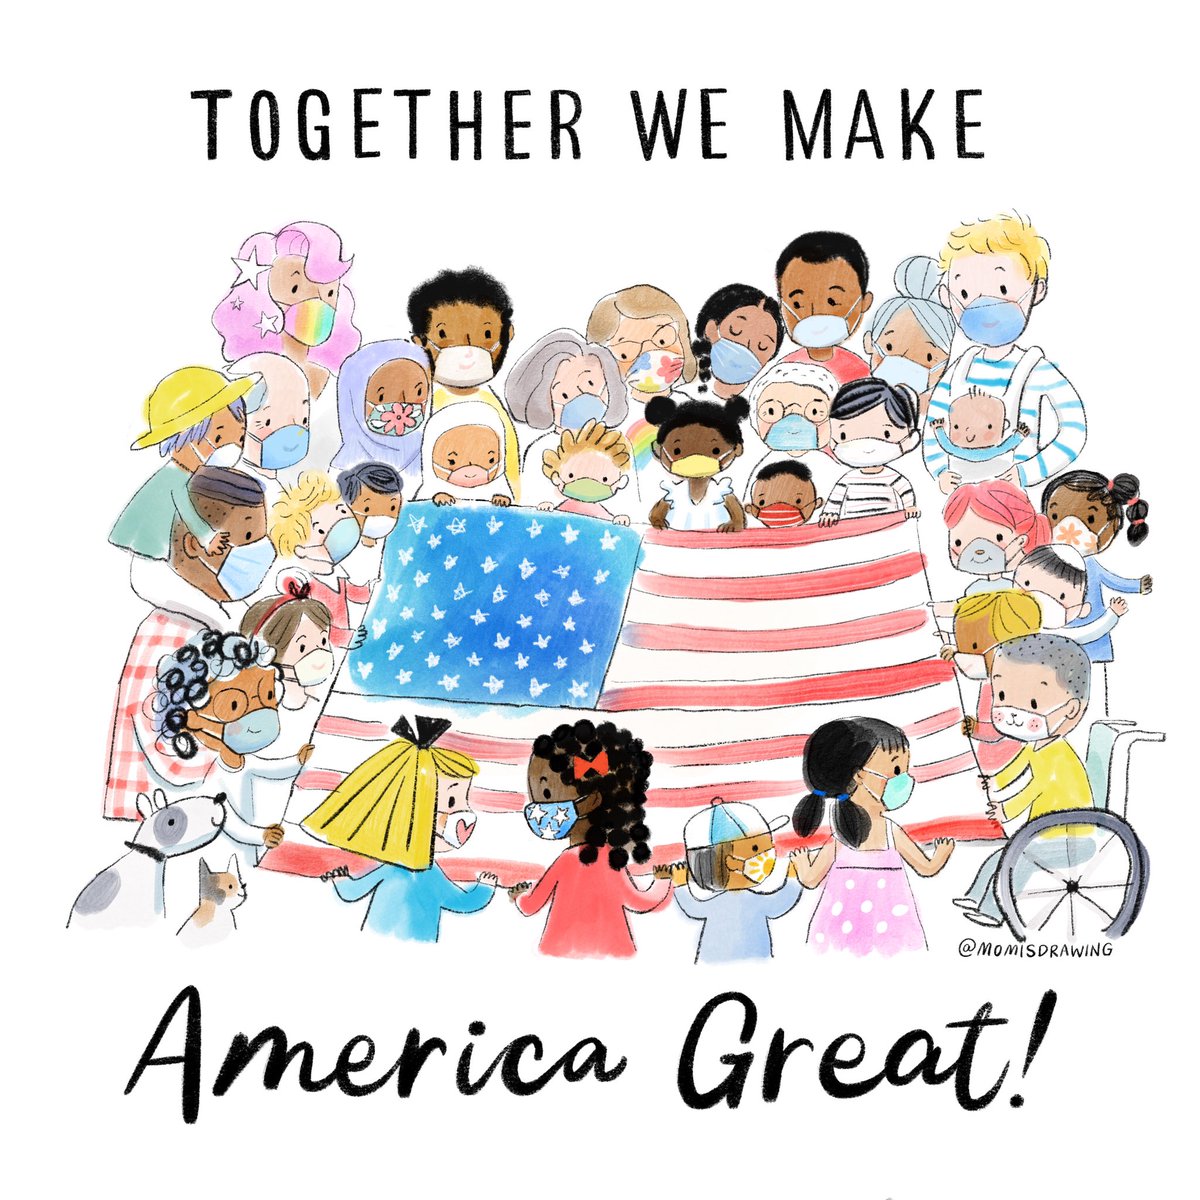 I love you 🇺🇸! You are in every one of us. Let’s work together to keep America we love safe. Stay home when you can, be kind to one another and wear your mask!💙❤️🤍 #kidlitformasks #makeamericakindagain #makeamericasafeagain #immigrantsmakeamericagreat #momisdrawing